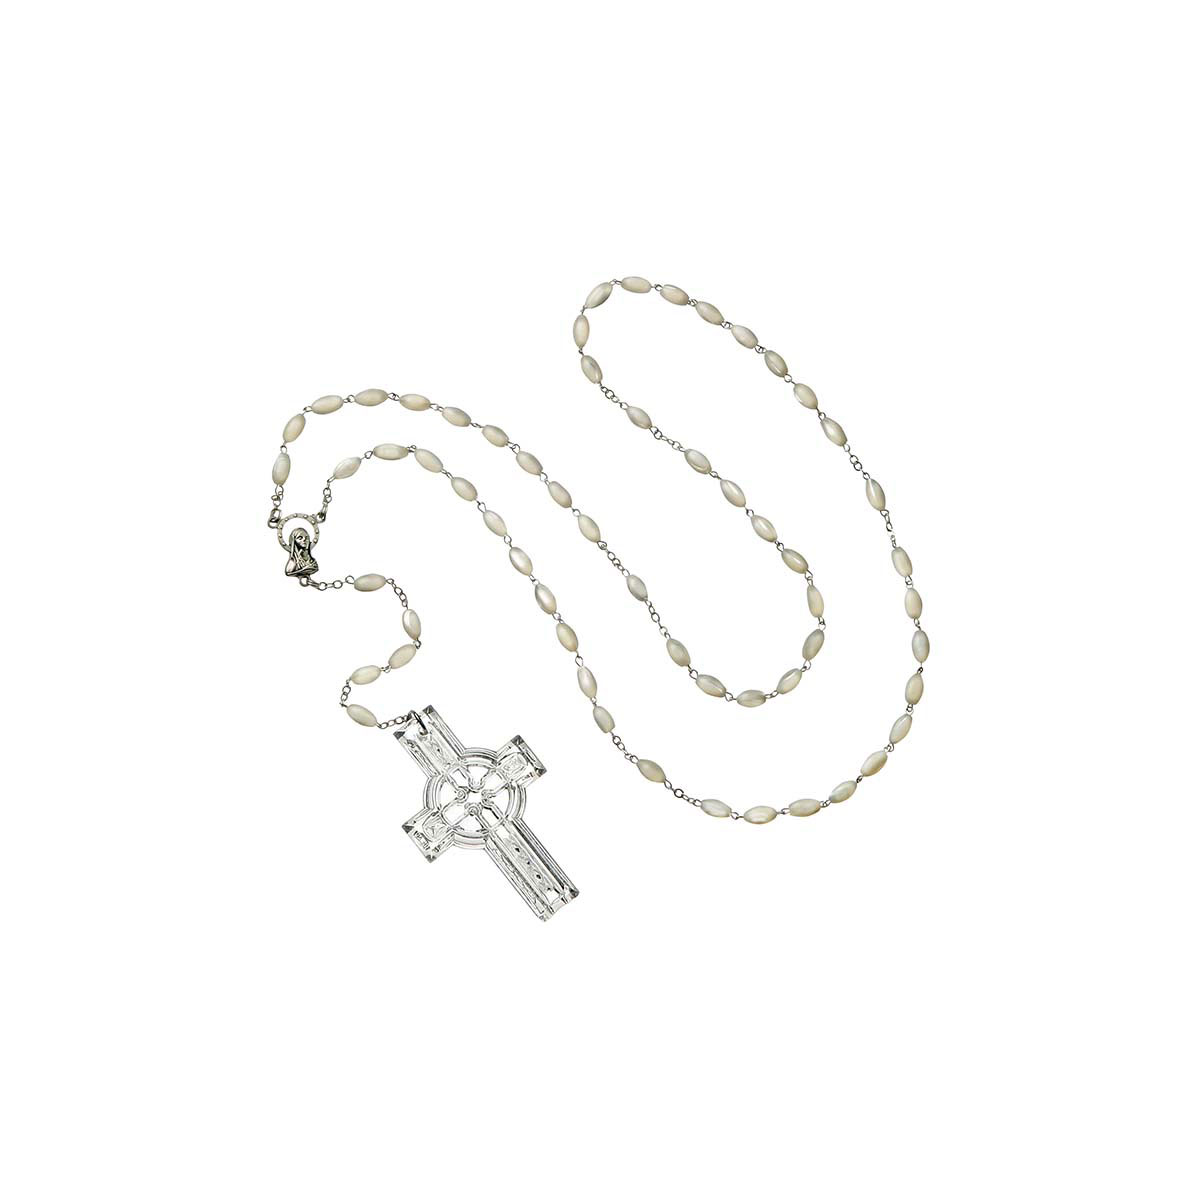 Waterford Crystal Rosary Beads